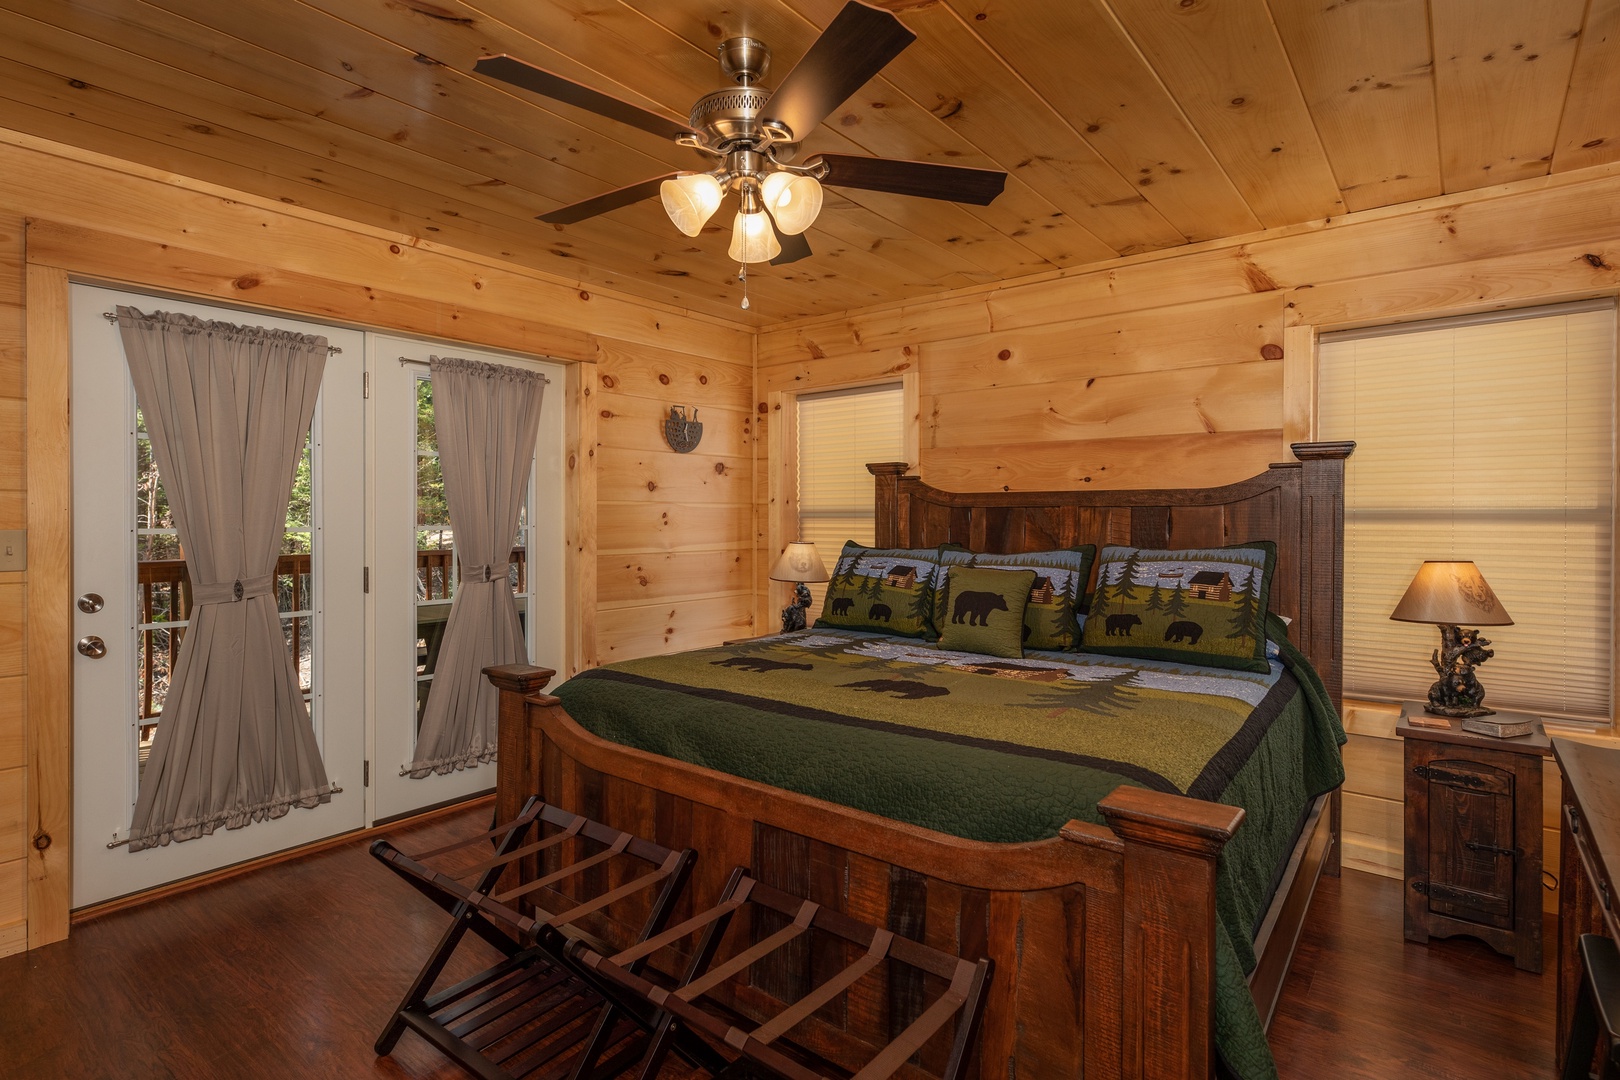 Bedroom with a king bed, night stands, and lamps at Gar Bear's Hideaway, a 3 bedroom cabin rental located in Pigeon Forge